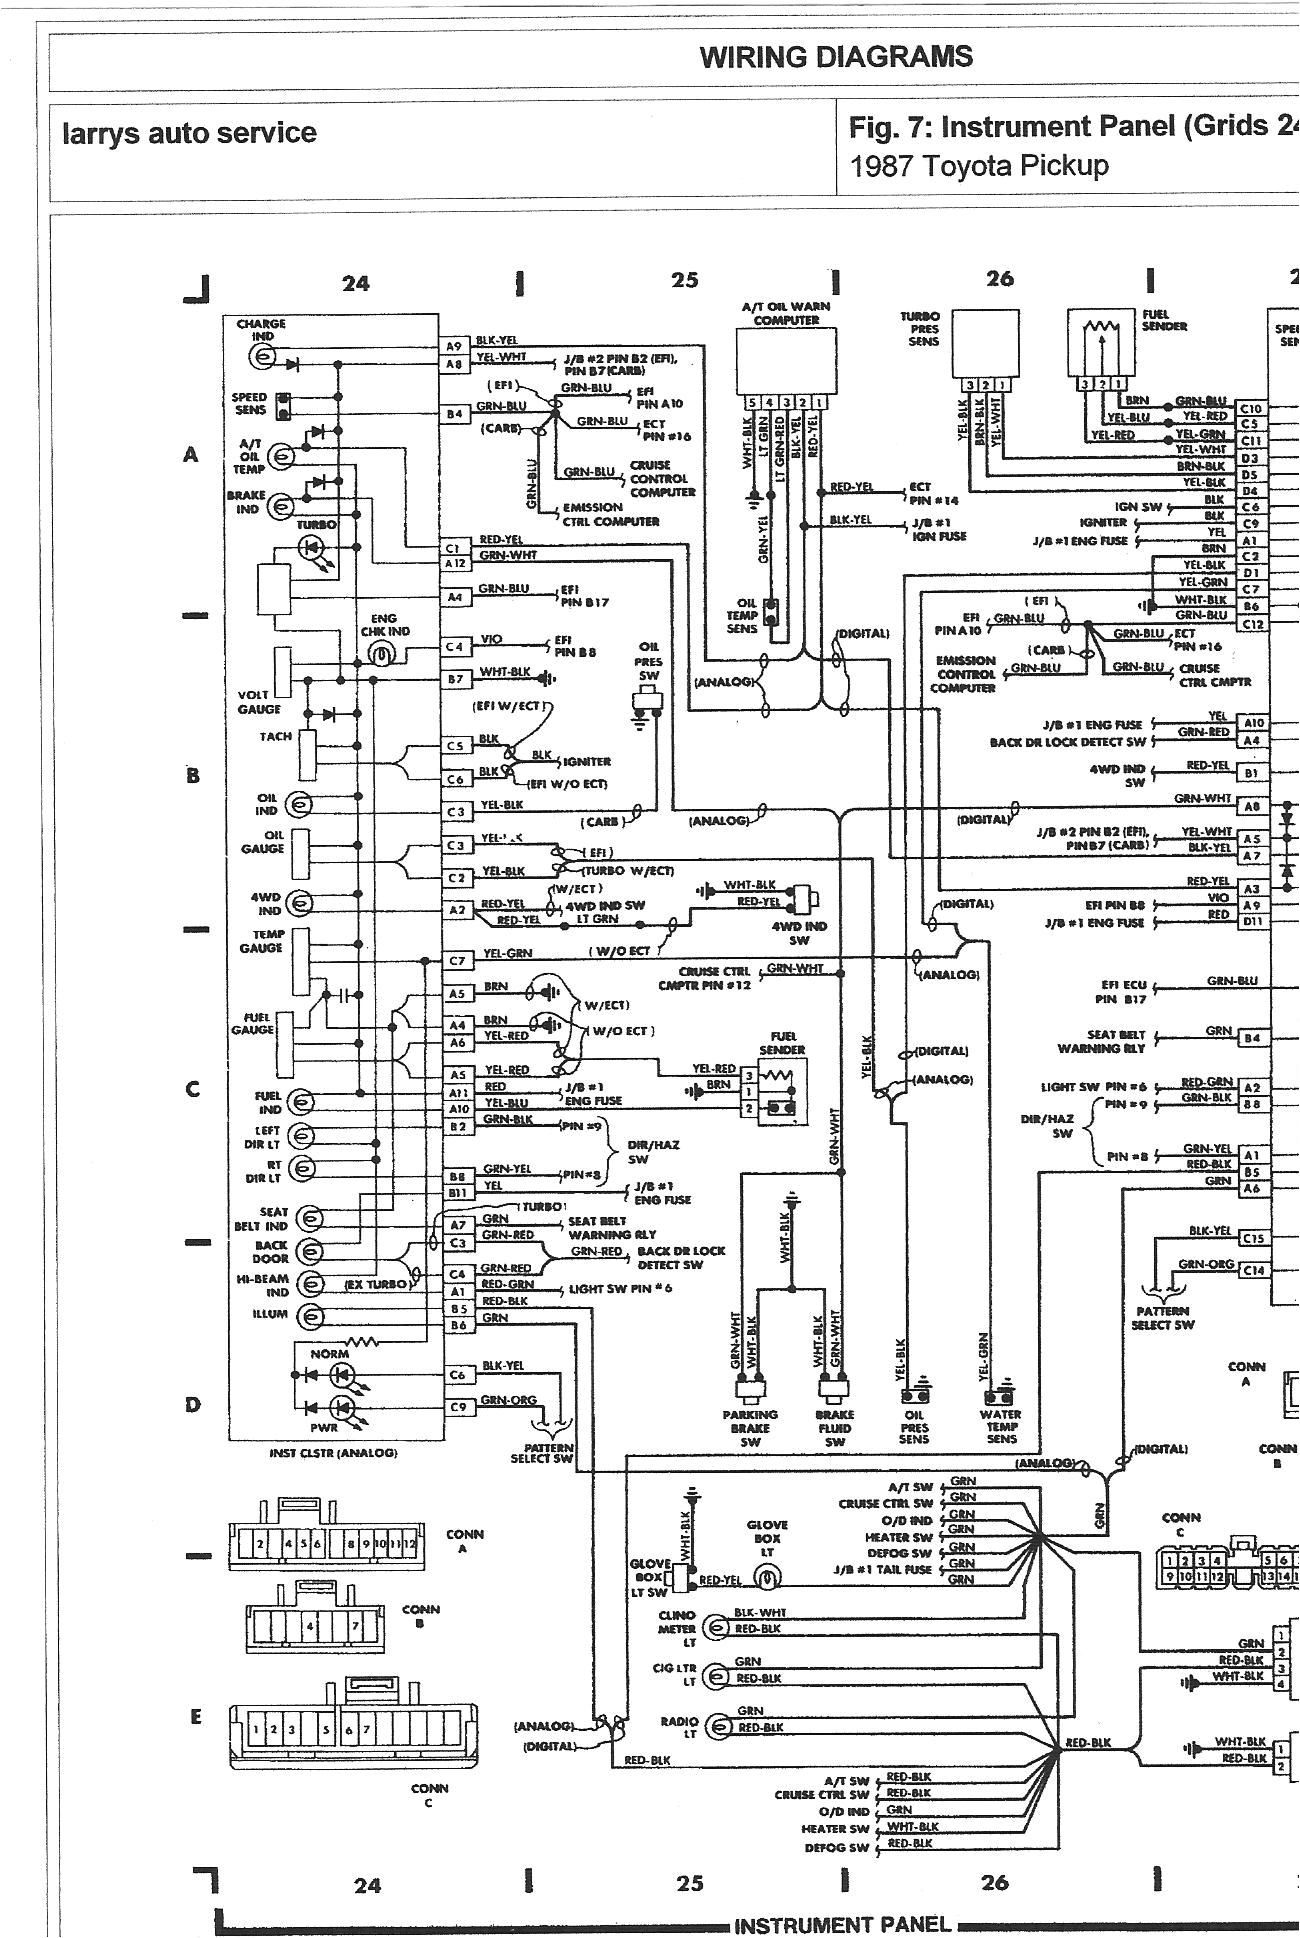 toyota pickup wiring harness diagram use wiring diagram 87 toyota headlight wiring colors